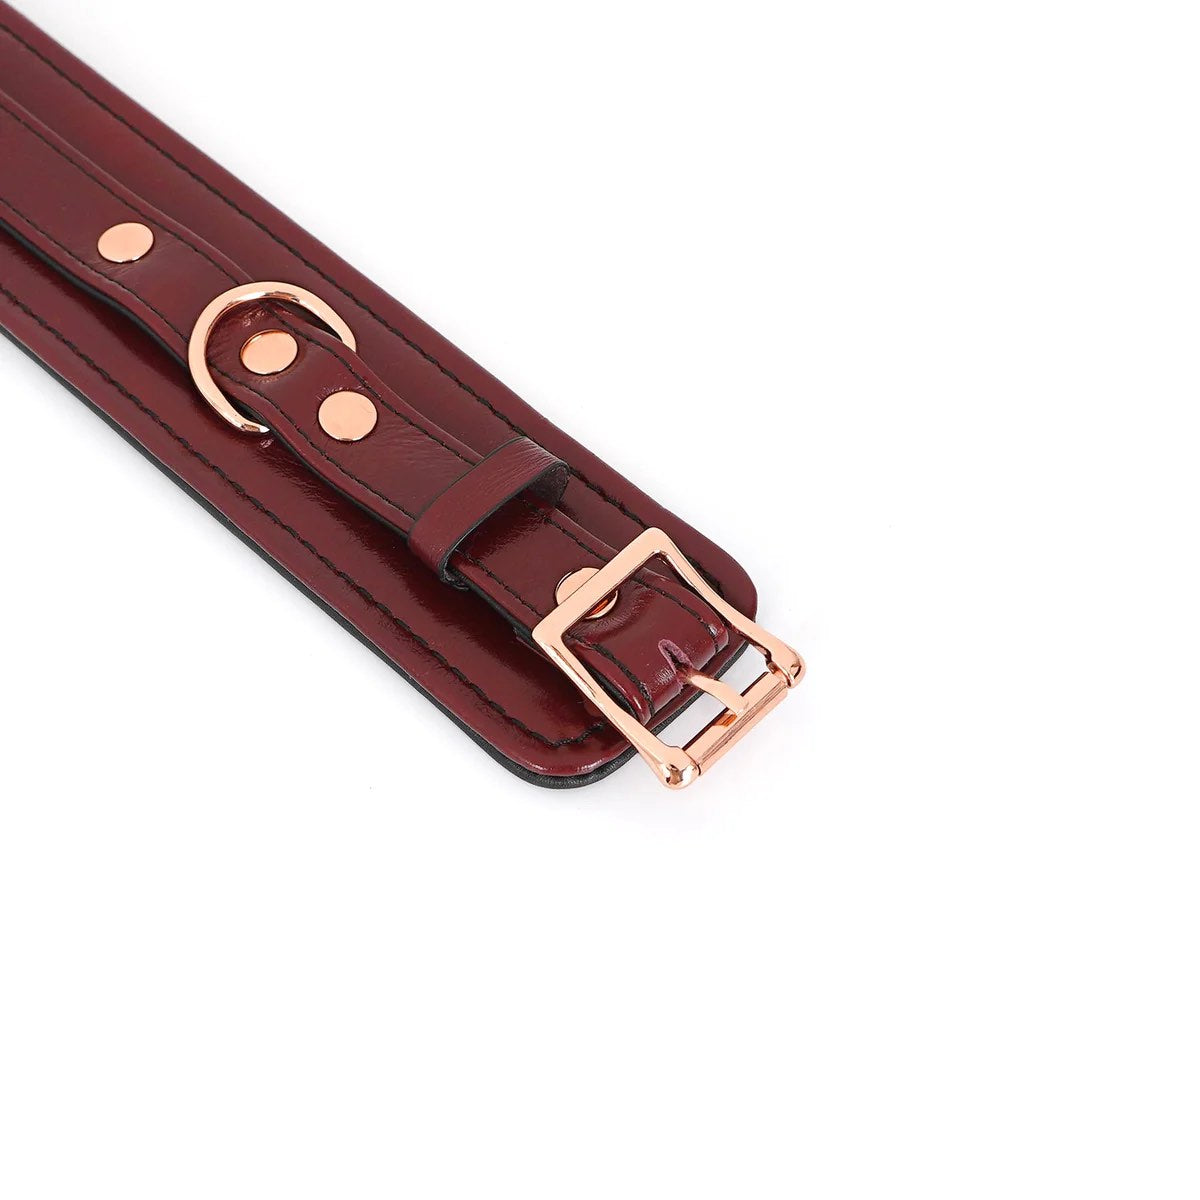 A close up of the buckle end of the Burgundy Leather Cuffs with Rose Gold Hardware.